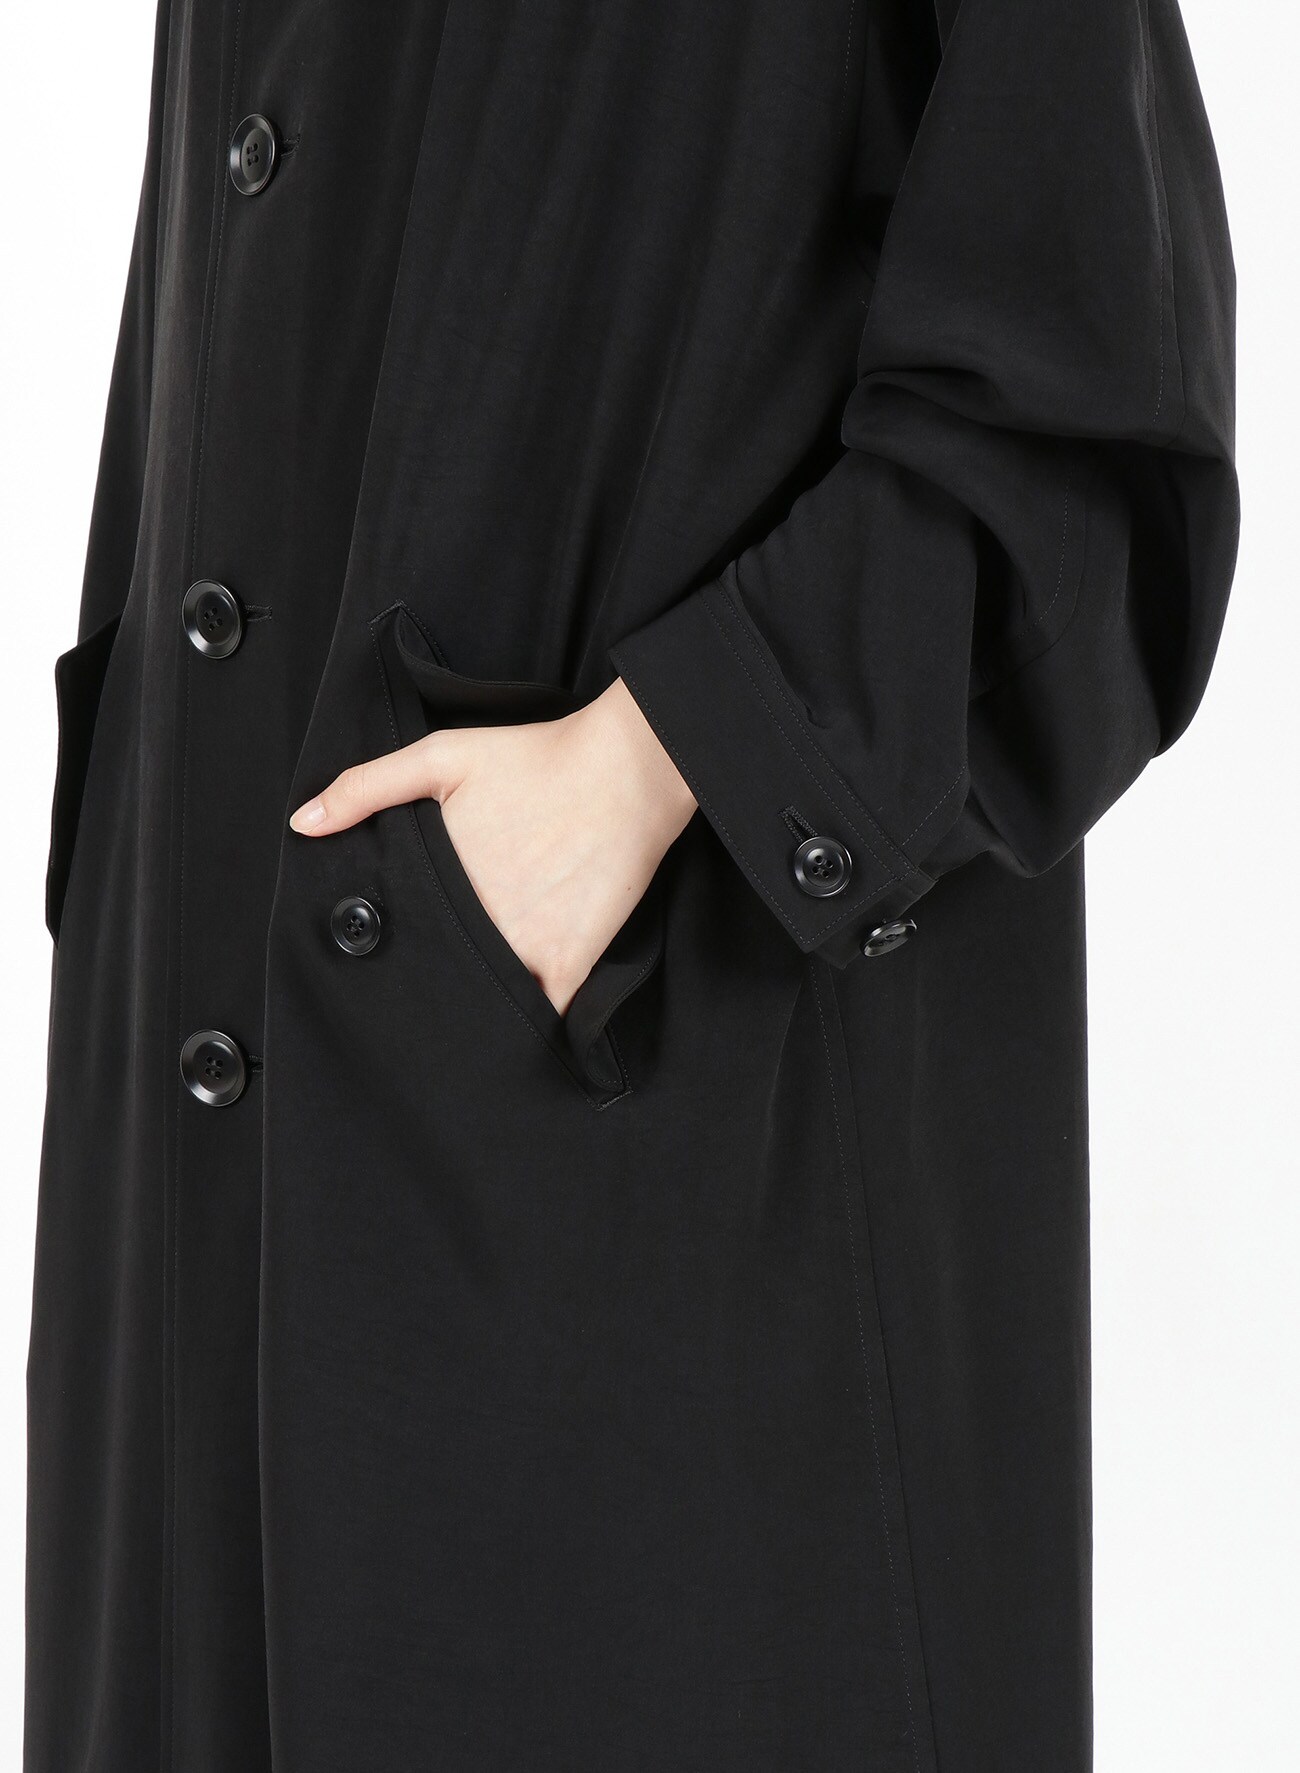 TRIACETATE POLYESTER de CHINE HOODED COAT